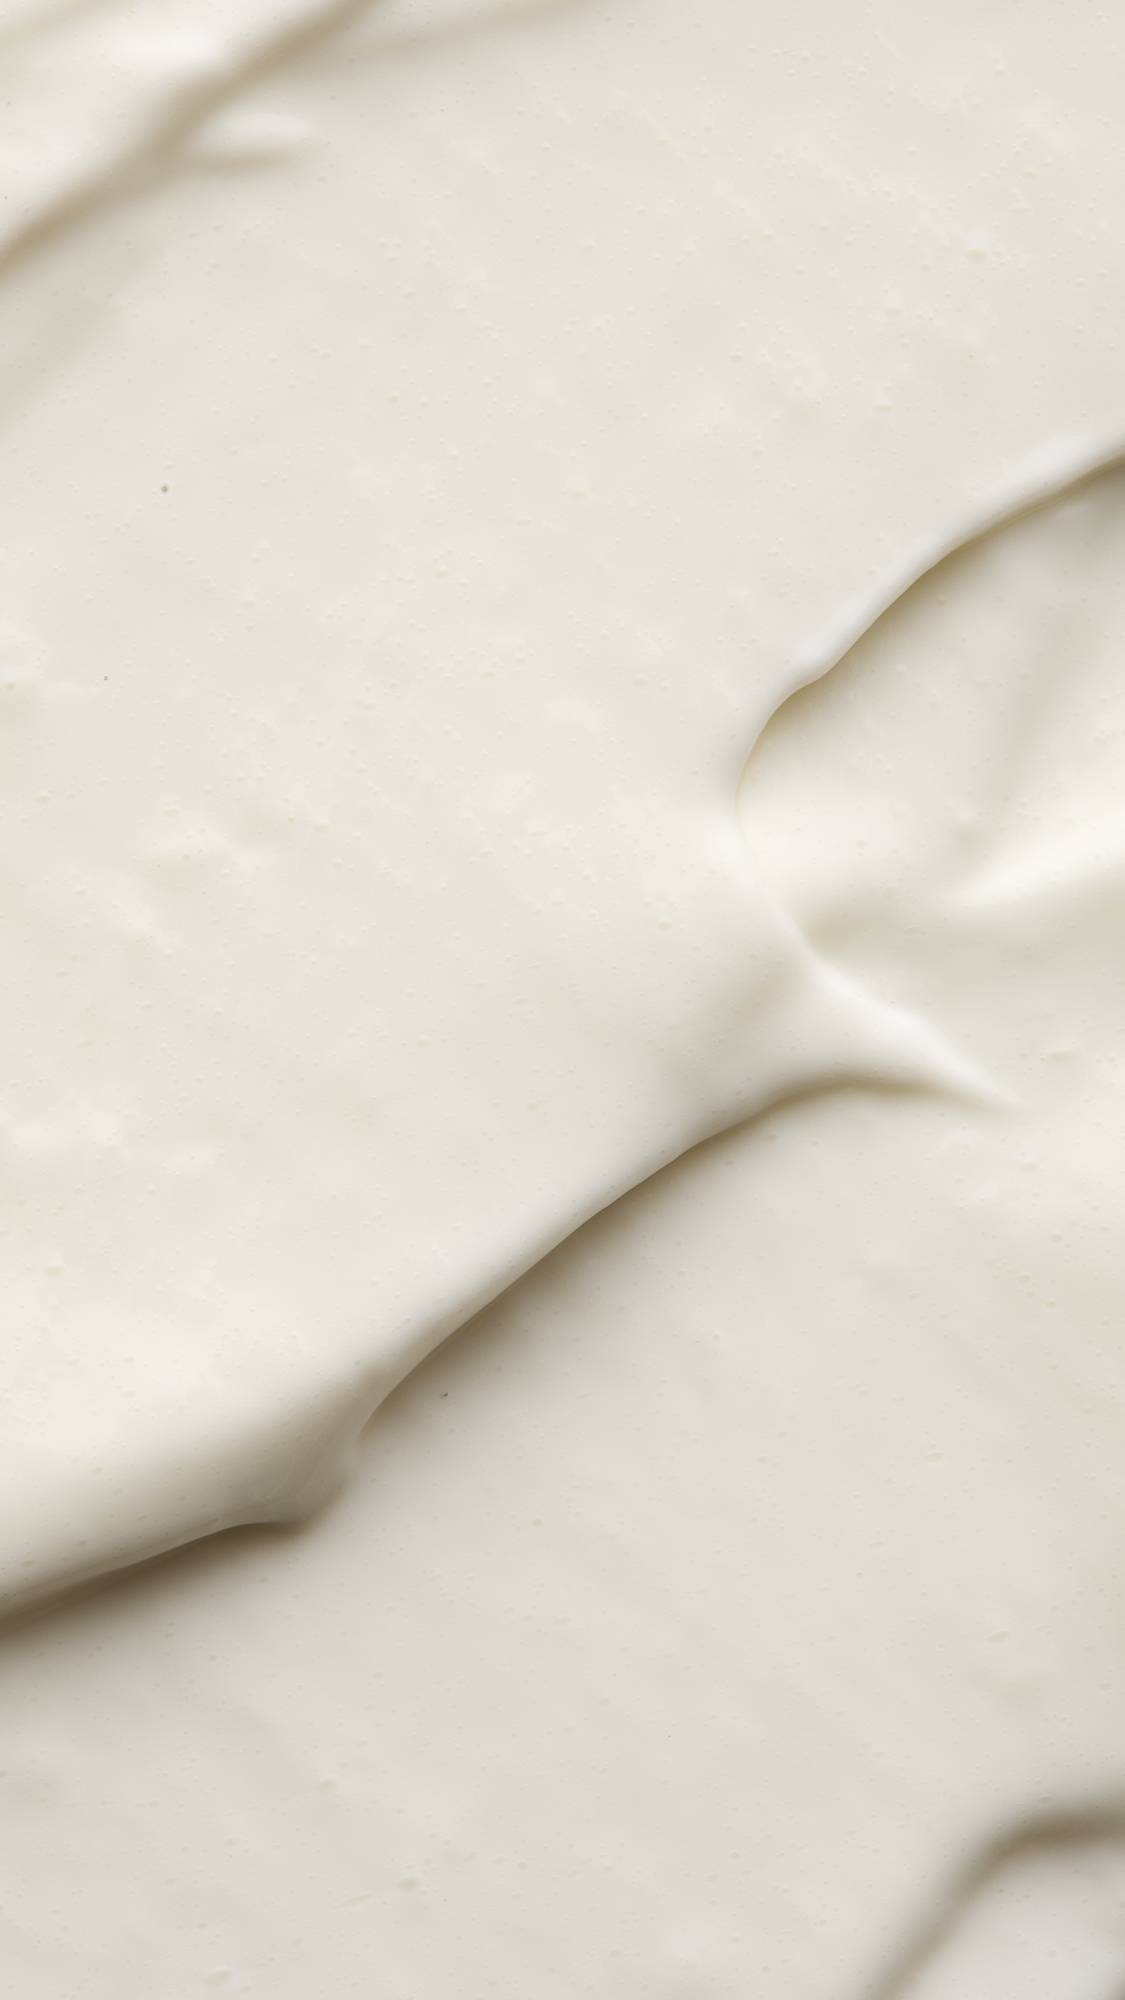 A super close-up image of the Vanishing Cream self-preserving moisturiser showing the light, silky, soft texture of the product. 